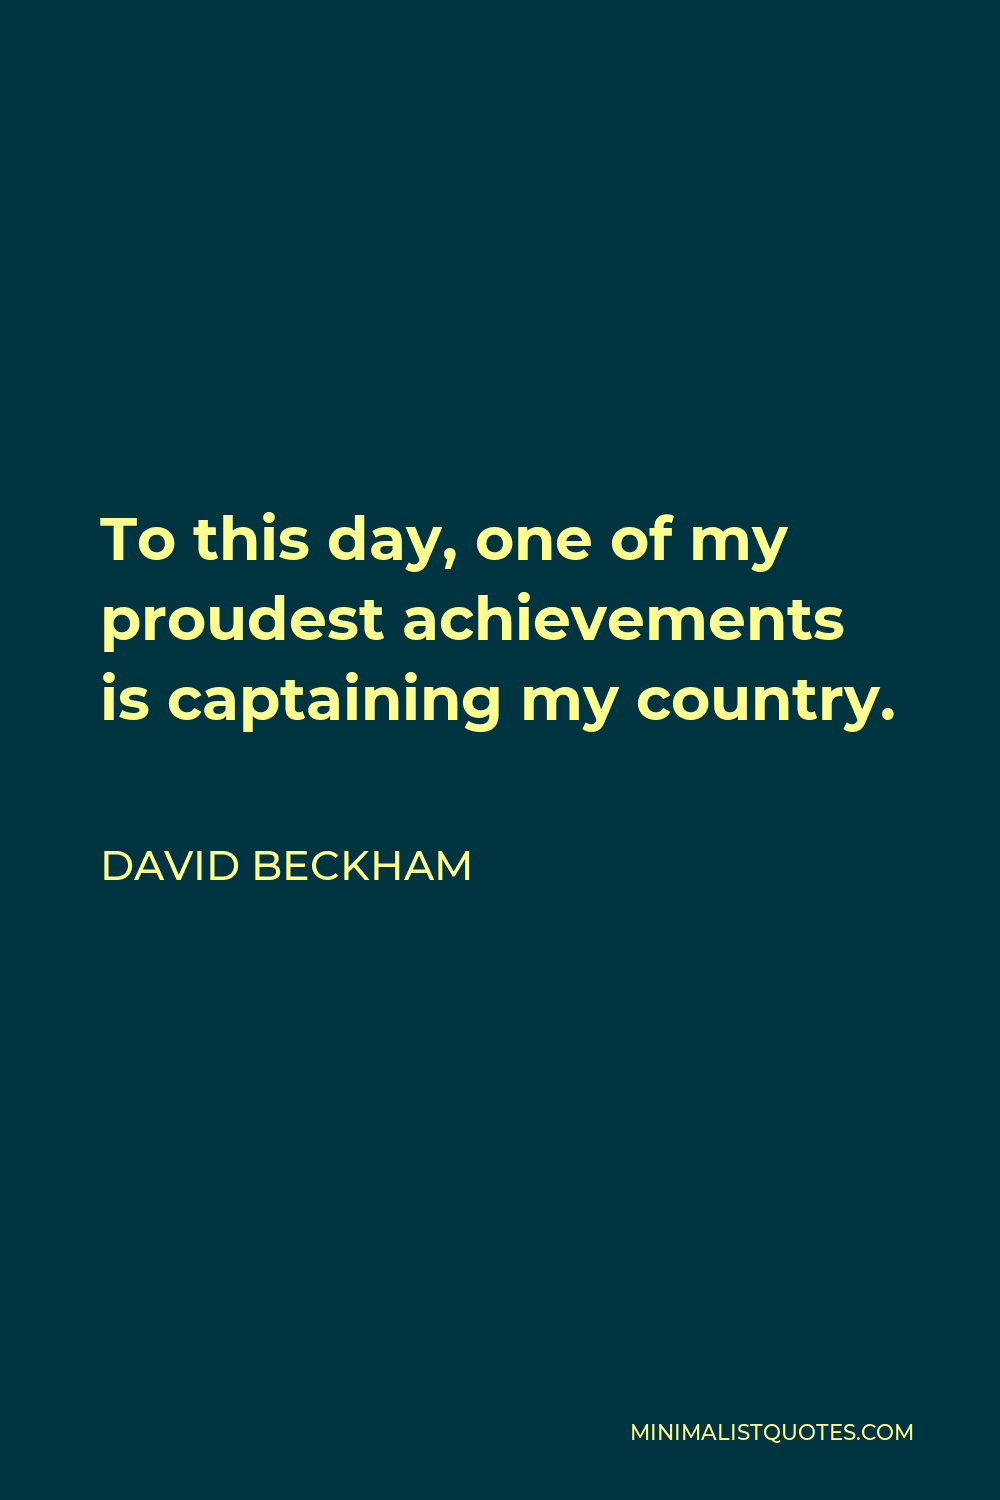 David Beckham Quote - To this day, one of my proudest achievements is captaining my country.